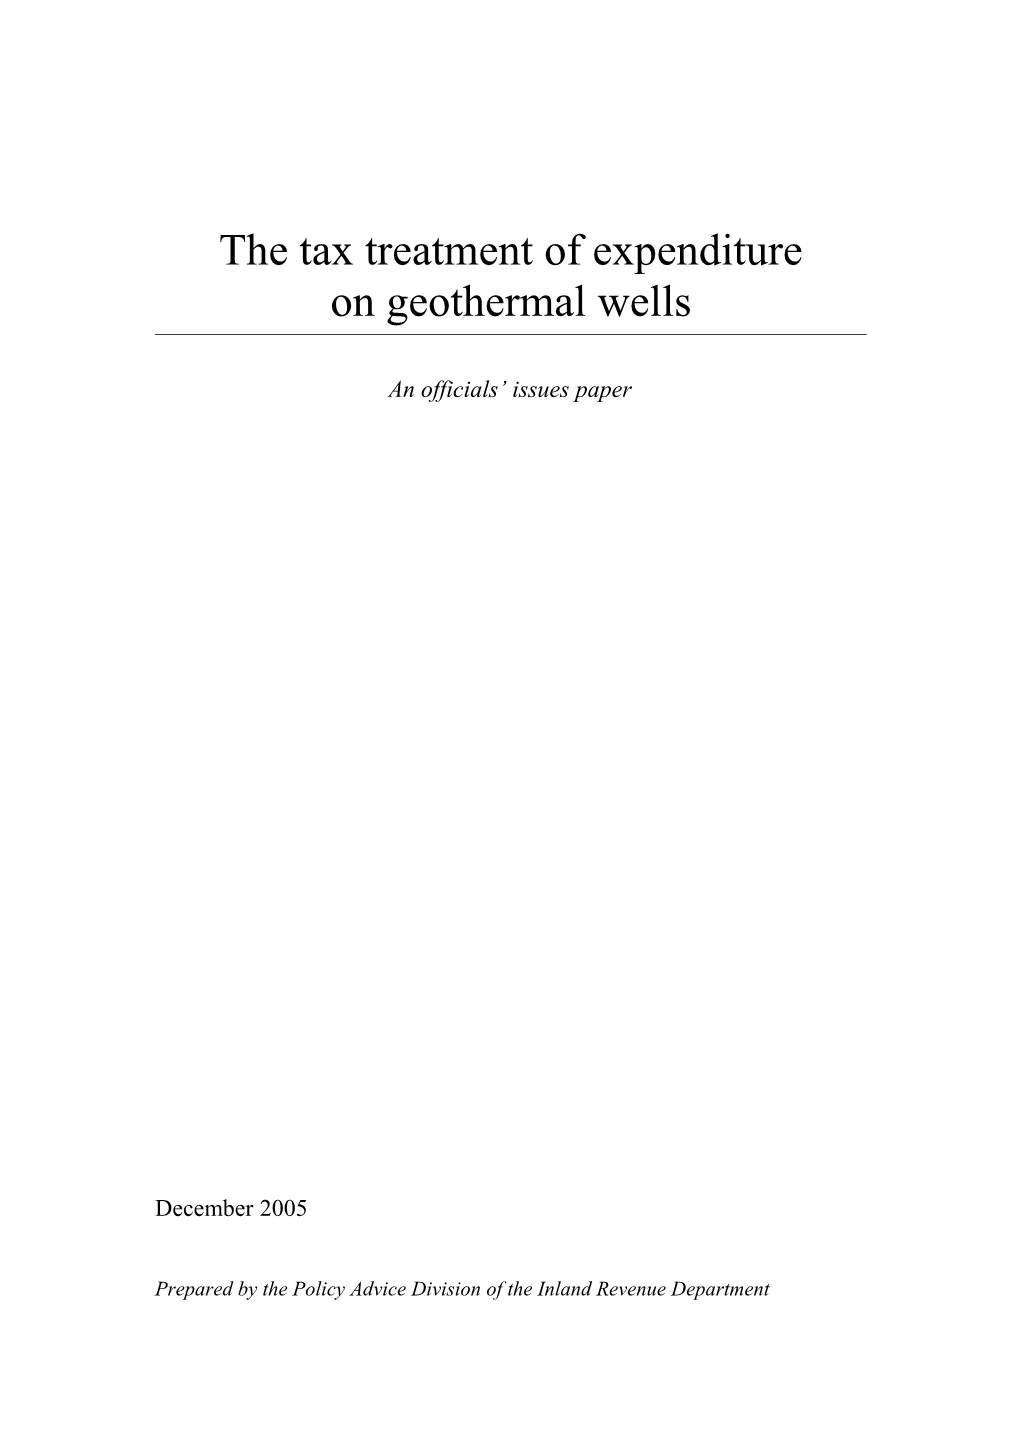 The Tax Treatment of Expenditure on Geothermal Wells